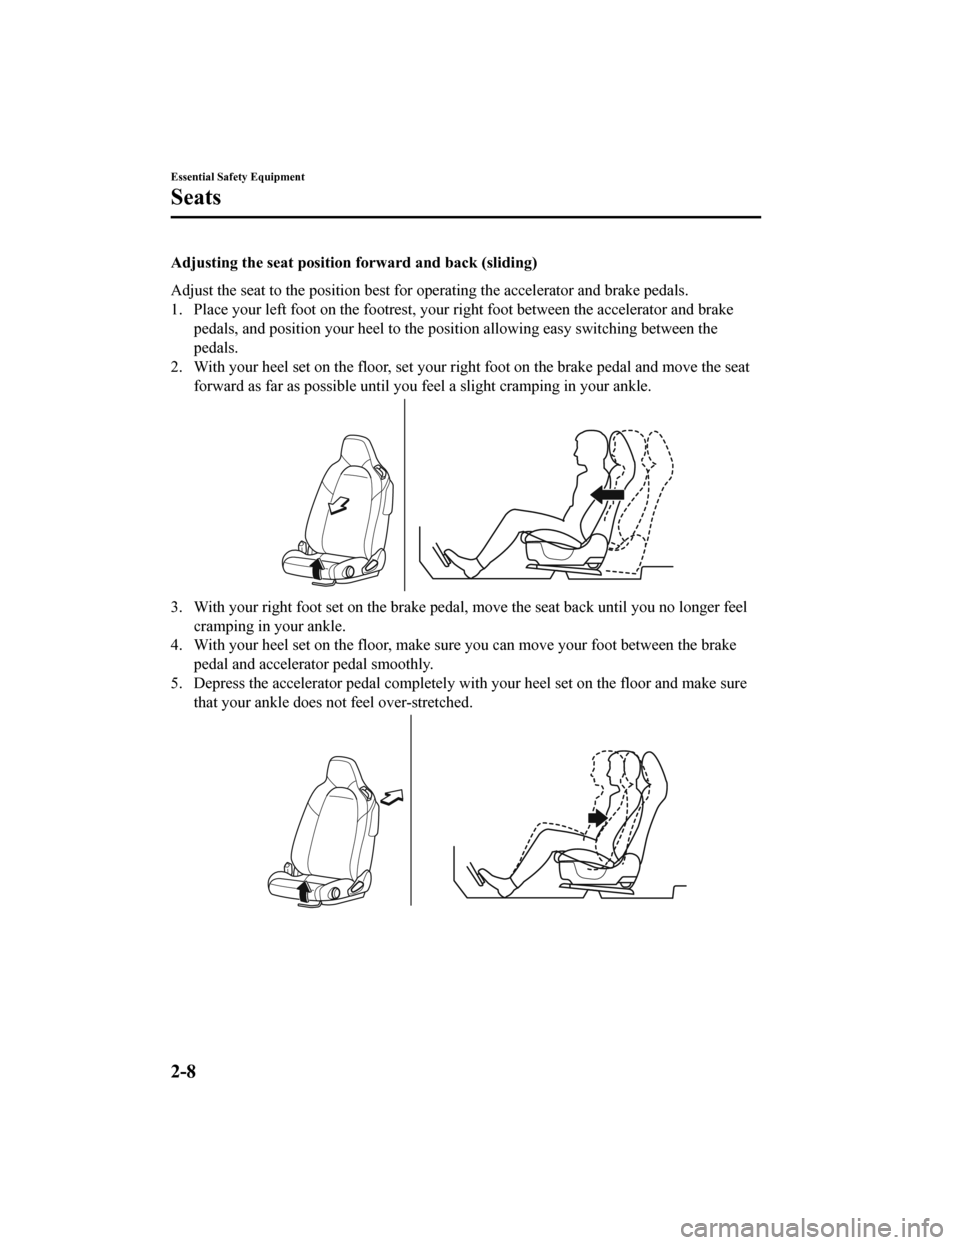 MAZDA MODEL MX-5 2020  Owners Manual (in English) Adjusting the seat position forward and back (sliding)
Adjust the seat to the position best for operating the accelerator and brake pedals.
1. Place your left foot on the fo otrest, your right foot be